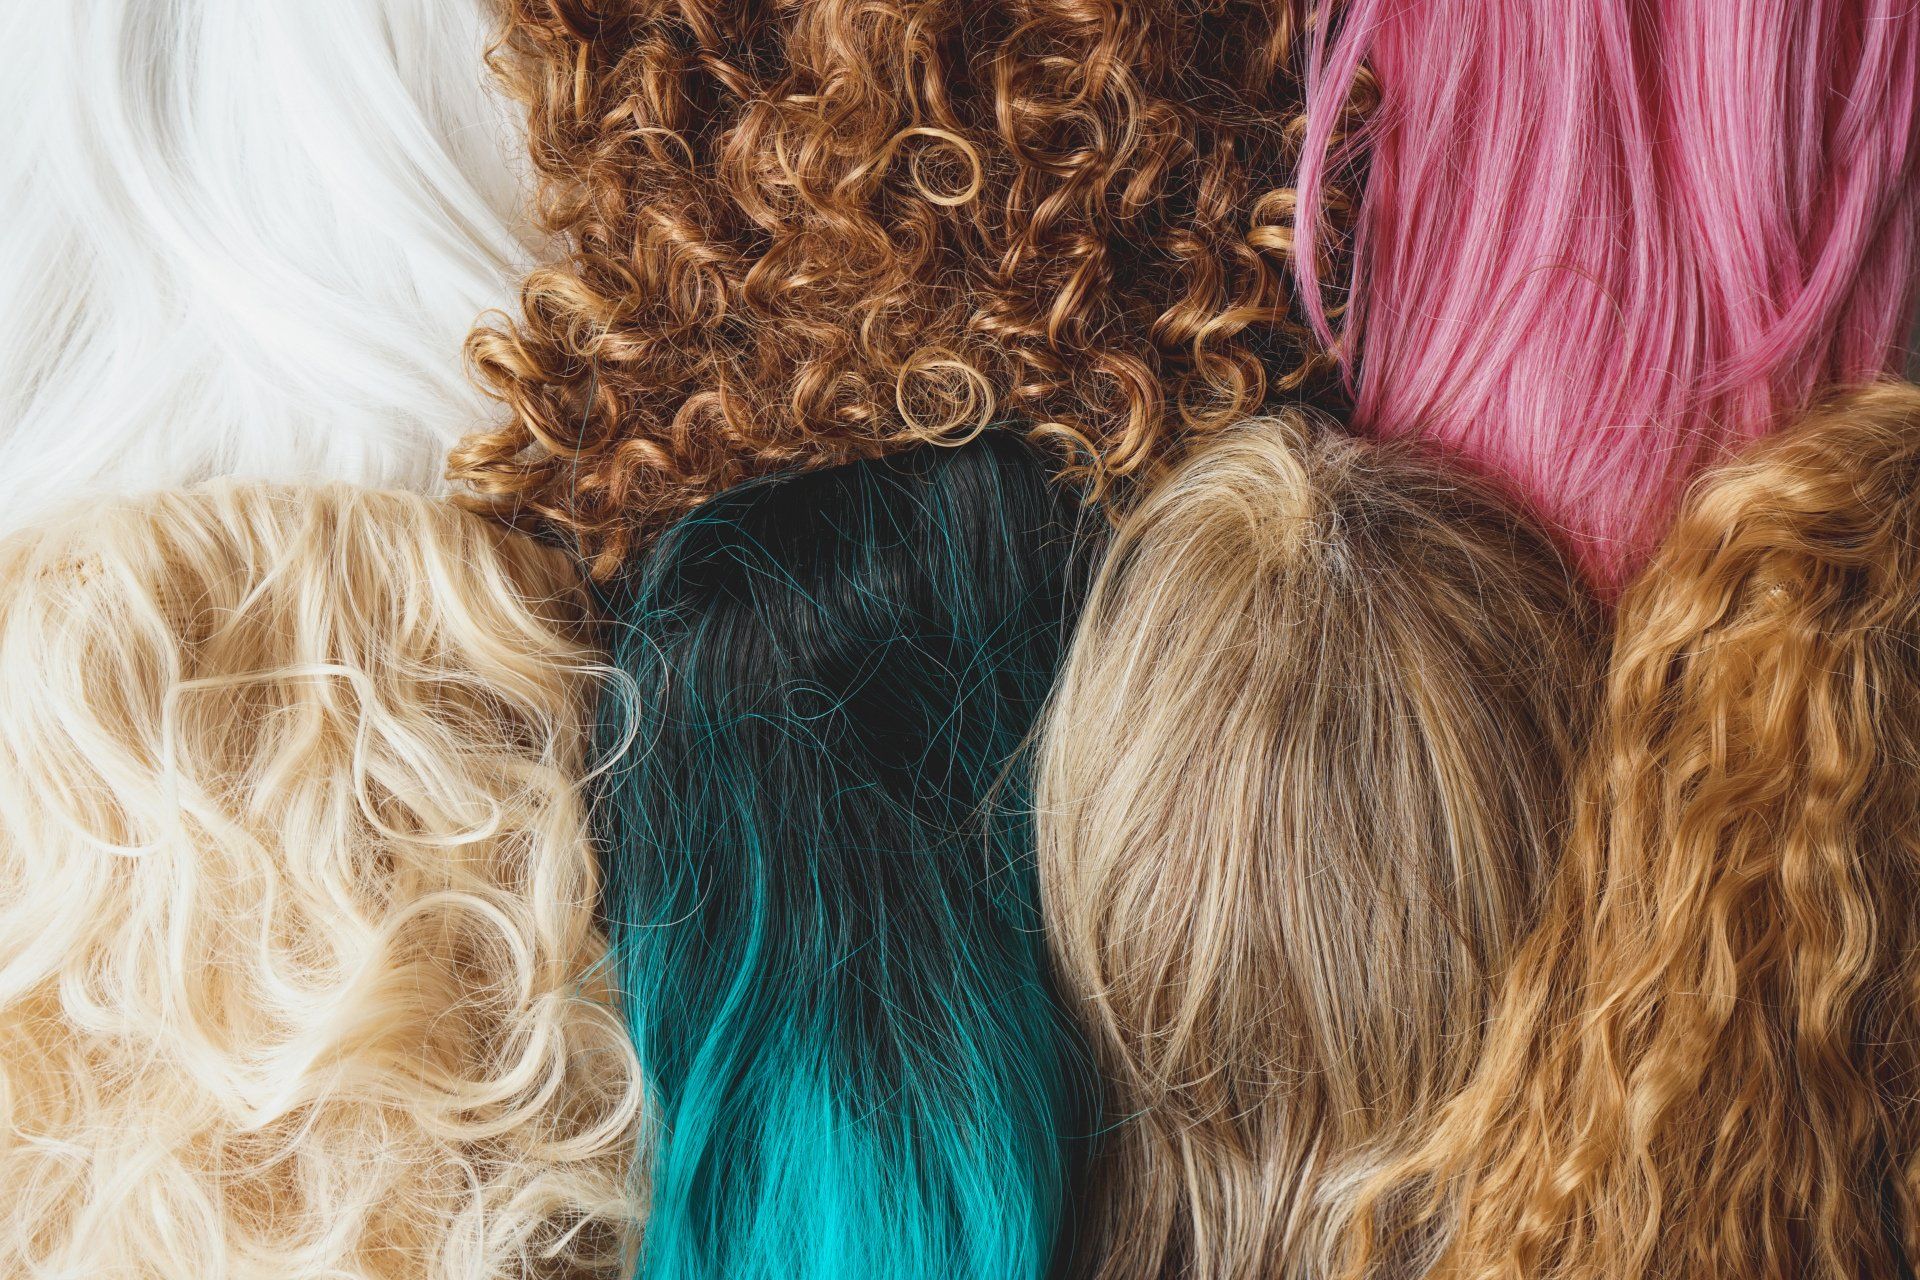 a group of wigs of different colors lies on top of each other on the table.